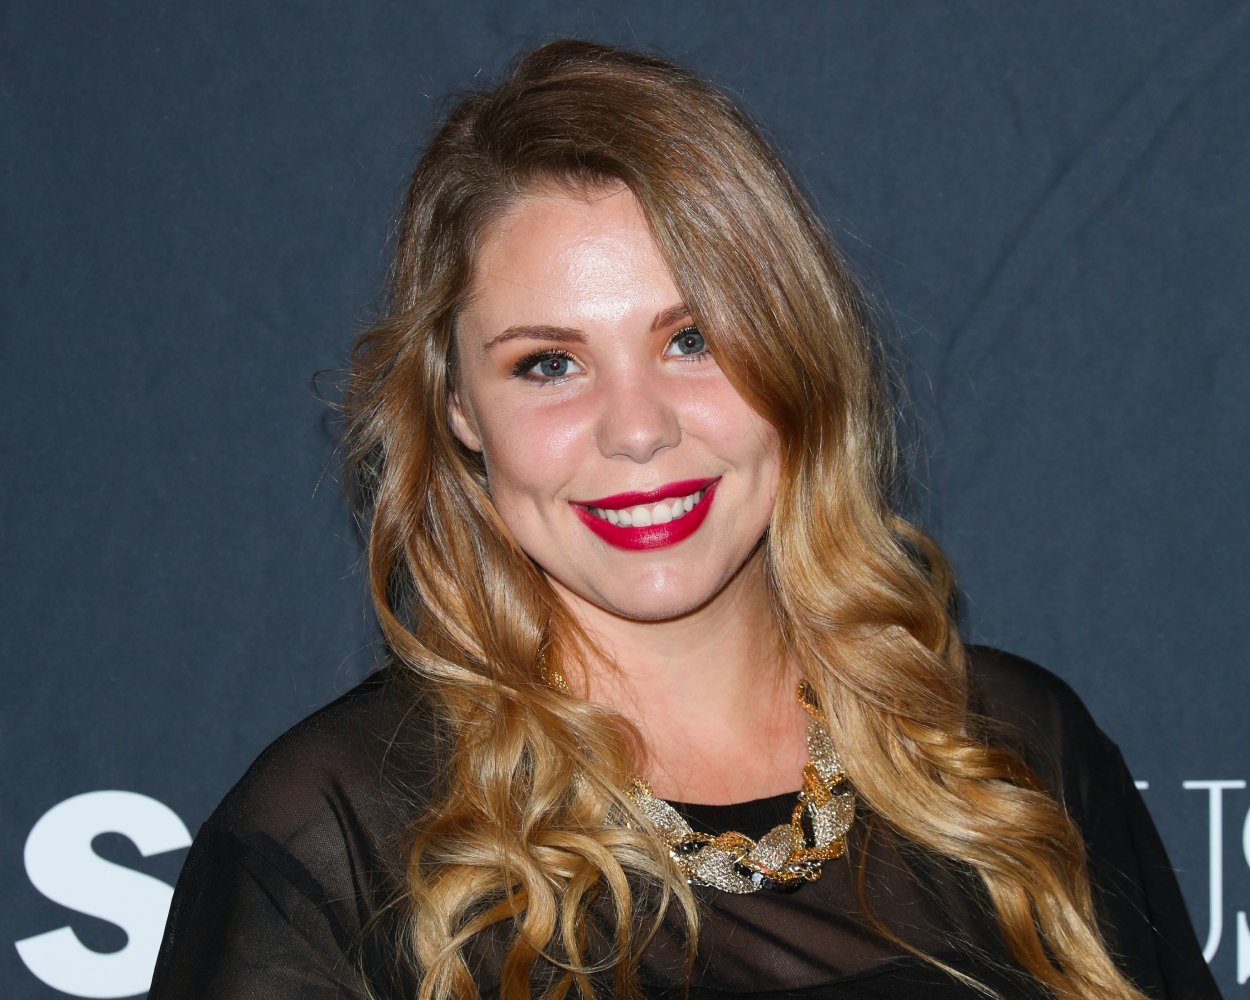 Reality TV Personality Kailyn Lowry posing and smiling at Star Magazine's Scene Stealers party